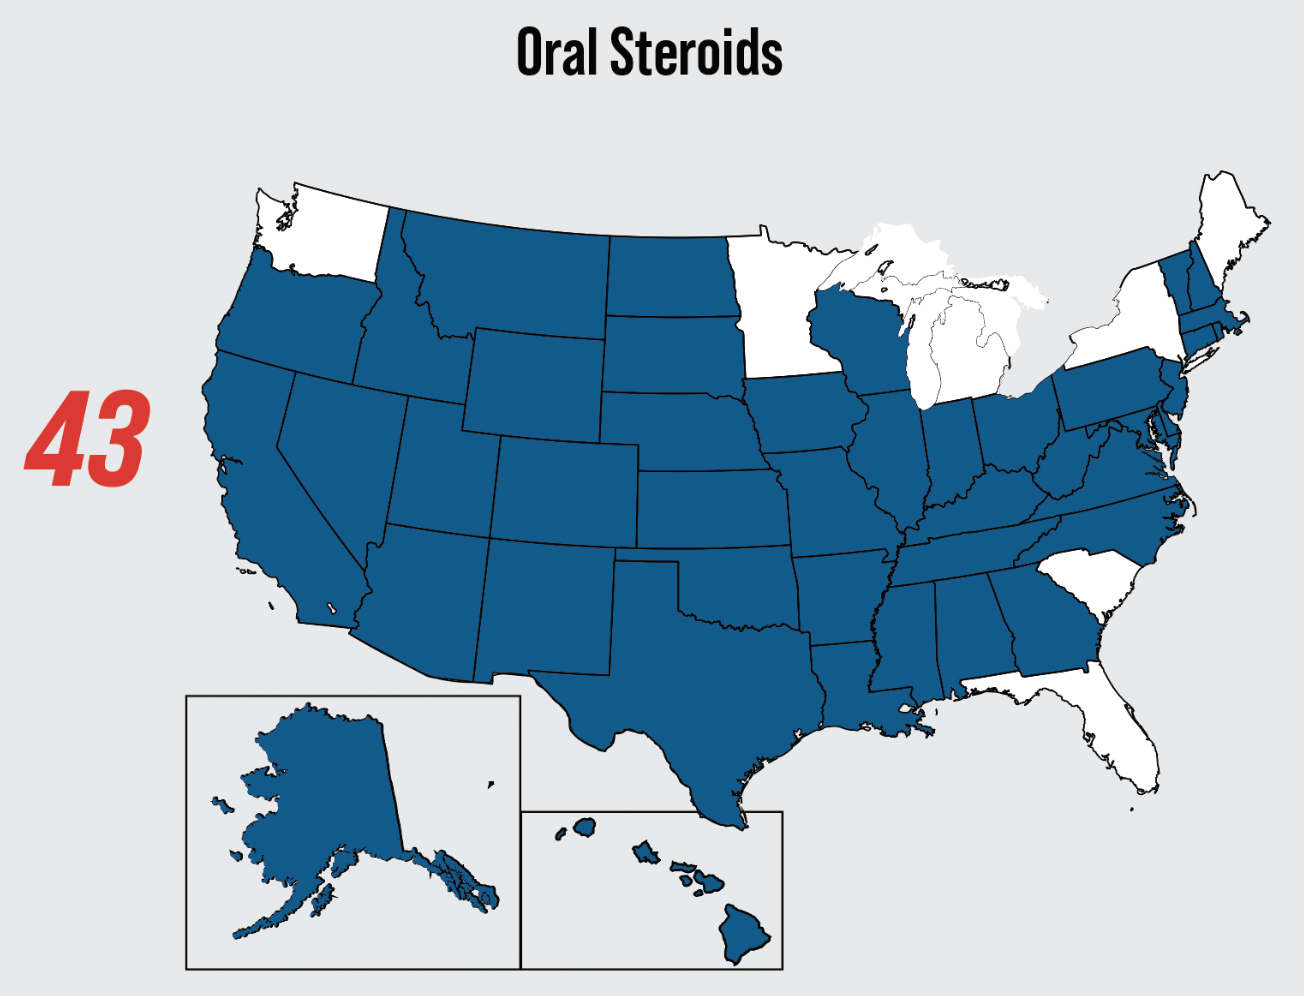 Fig. 1. This map displays the 43 US states where optometrists are currently authorized to prescribe oral steroids.